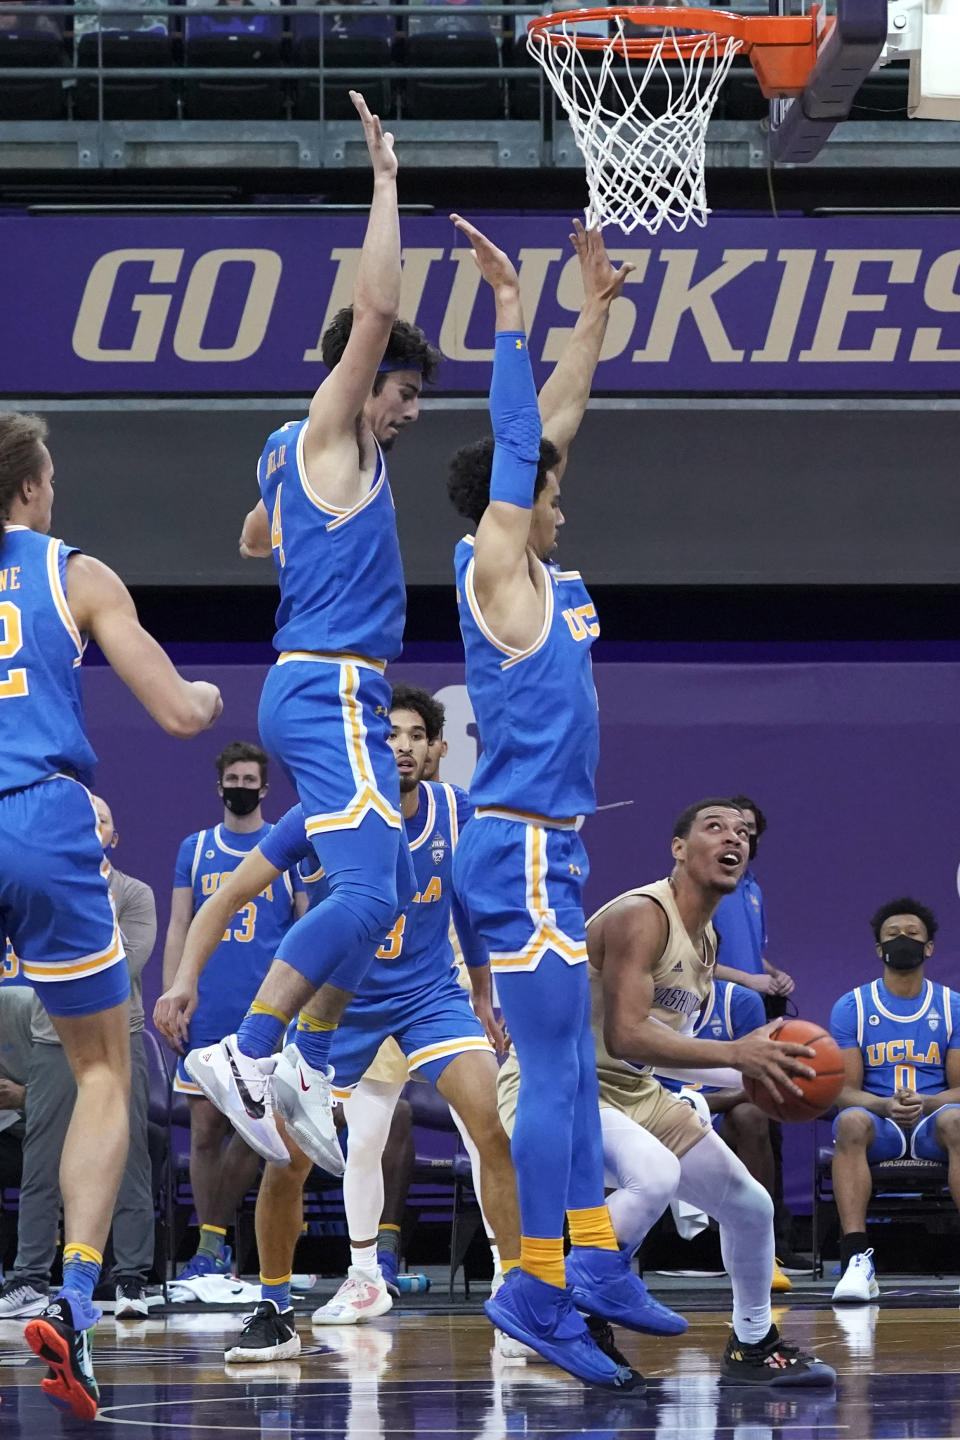 Washington guard Quade Green, right, looks to shoot against UCLA guards Jaime Jaquez Jr., center left, and Jules Bernard, center right, during the first half of an NCAA college basketball game Saturday, Feb. 13, 2021, in Seattle. (AP Photo/Ted S. Warren)